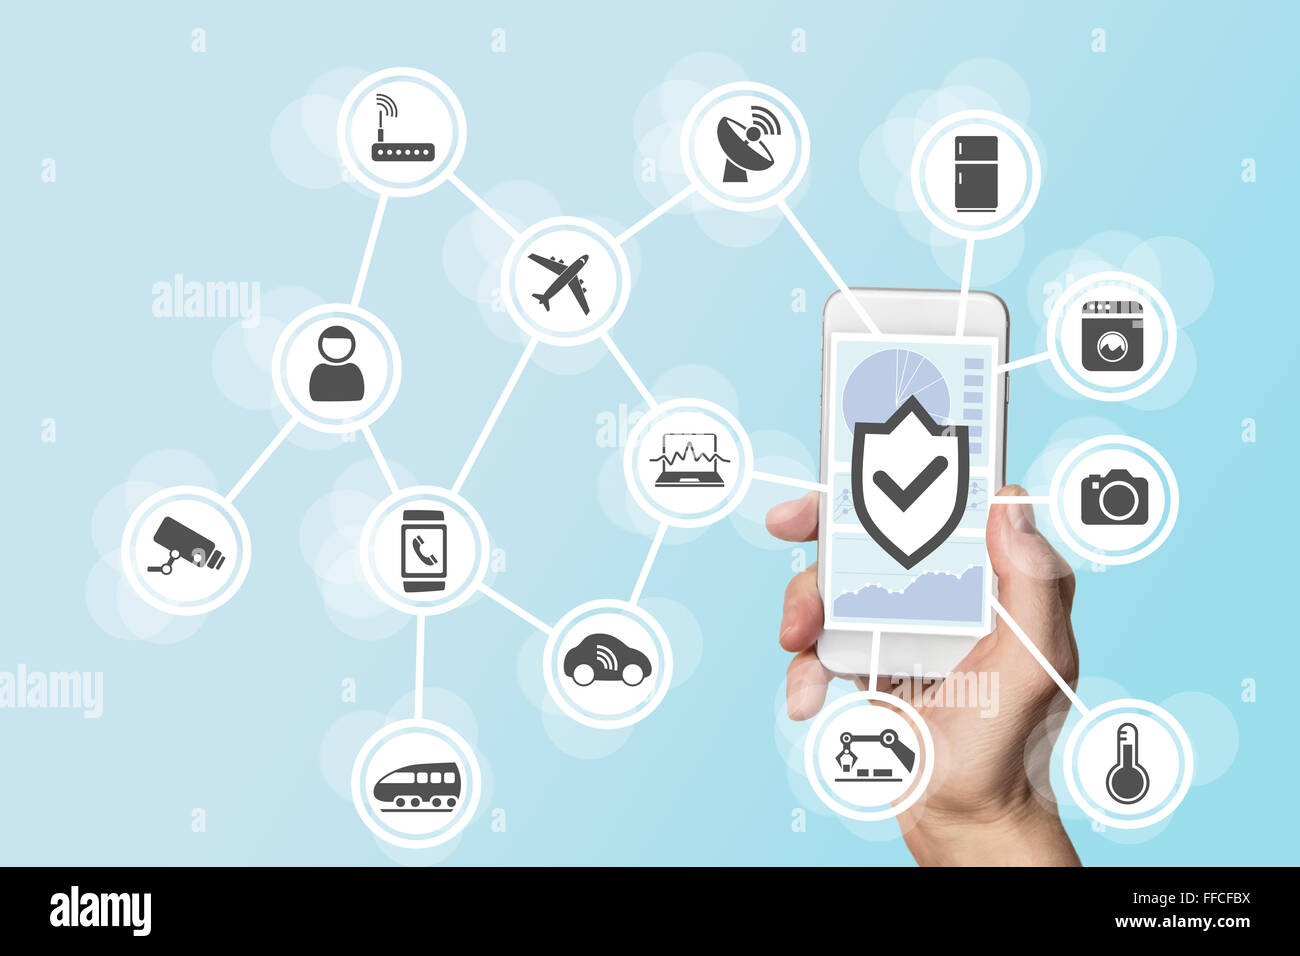 Internet of things security concept with hand holding modern smart phone to control intruders into a network of objects Stock Photo